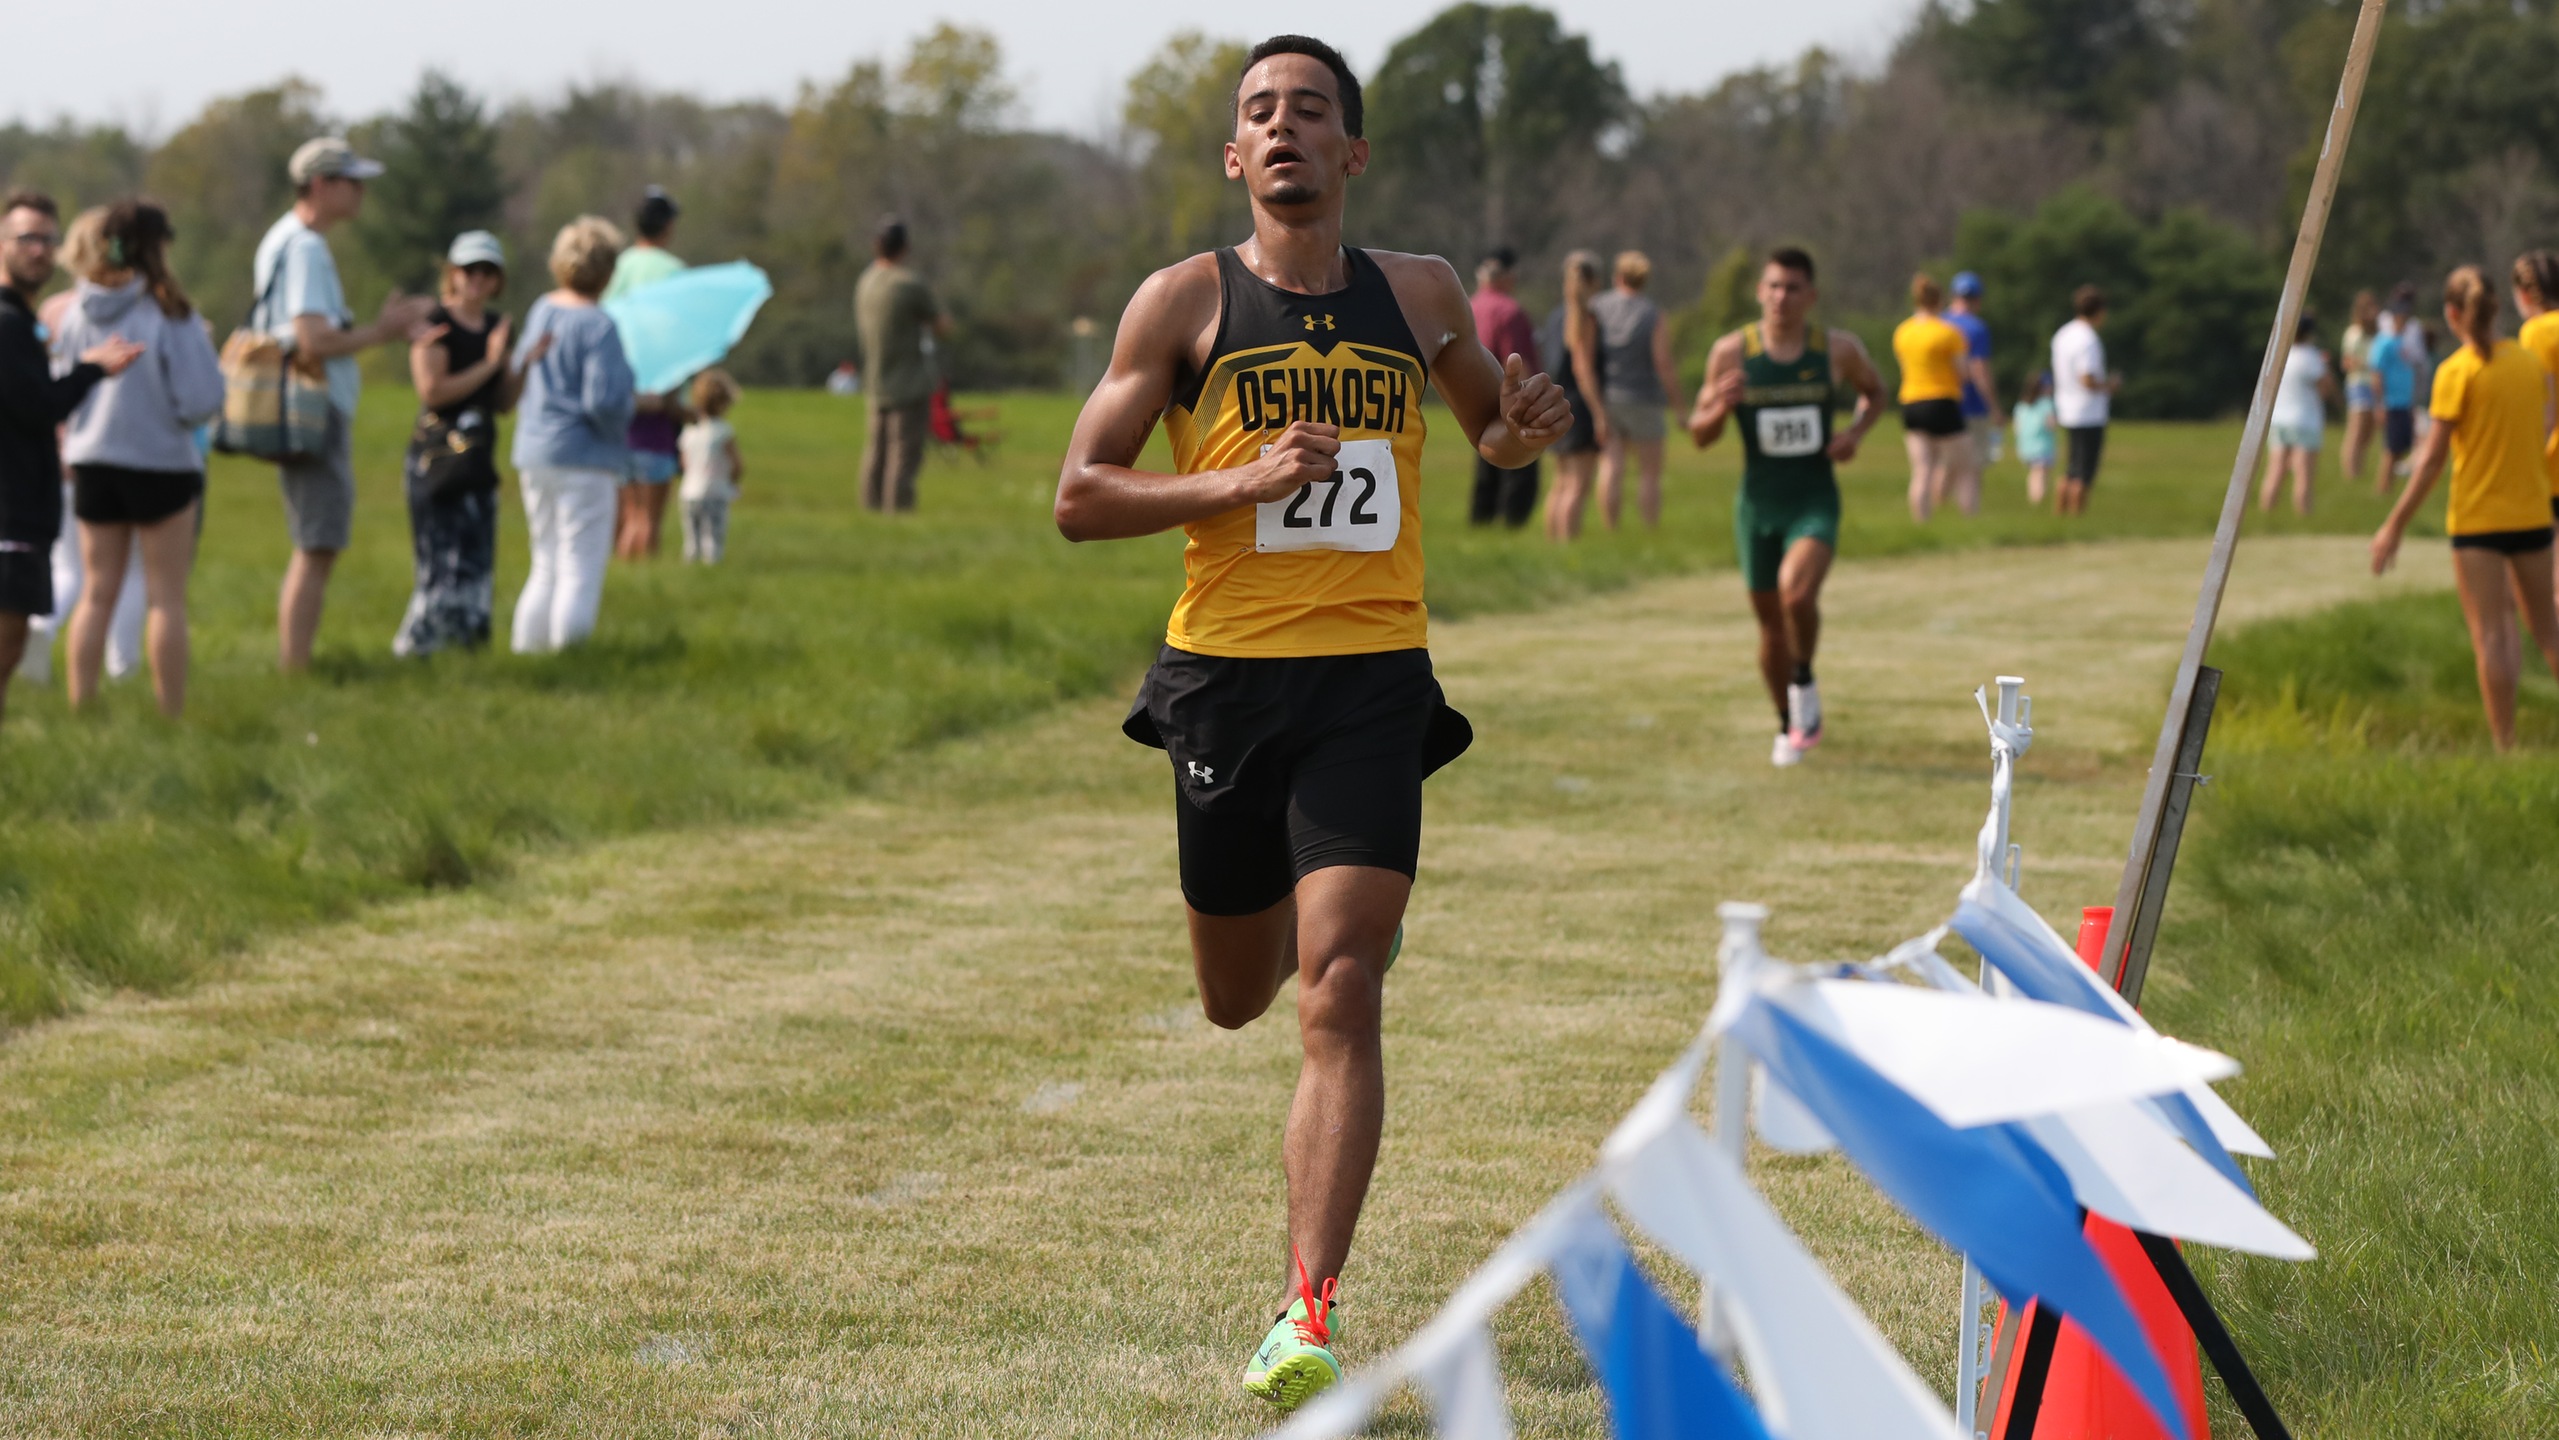 Steven Potter paced UW-Oshkosh at the Inter-Regional Rumble with his 15th-place finish.